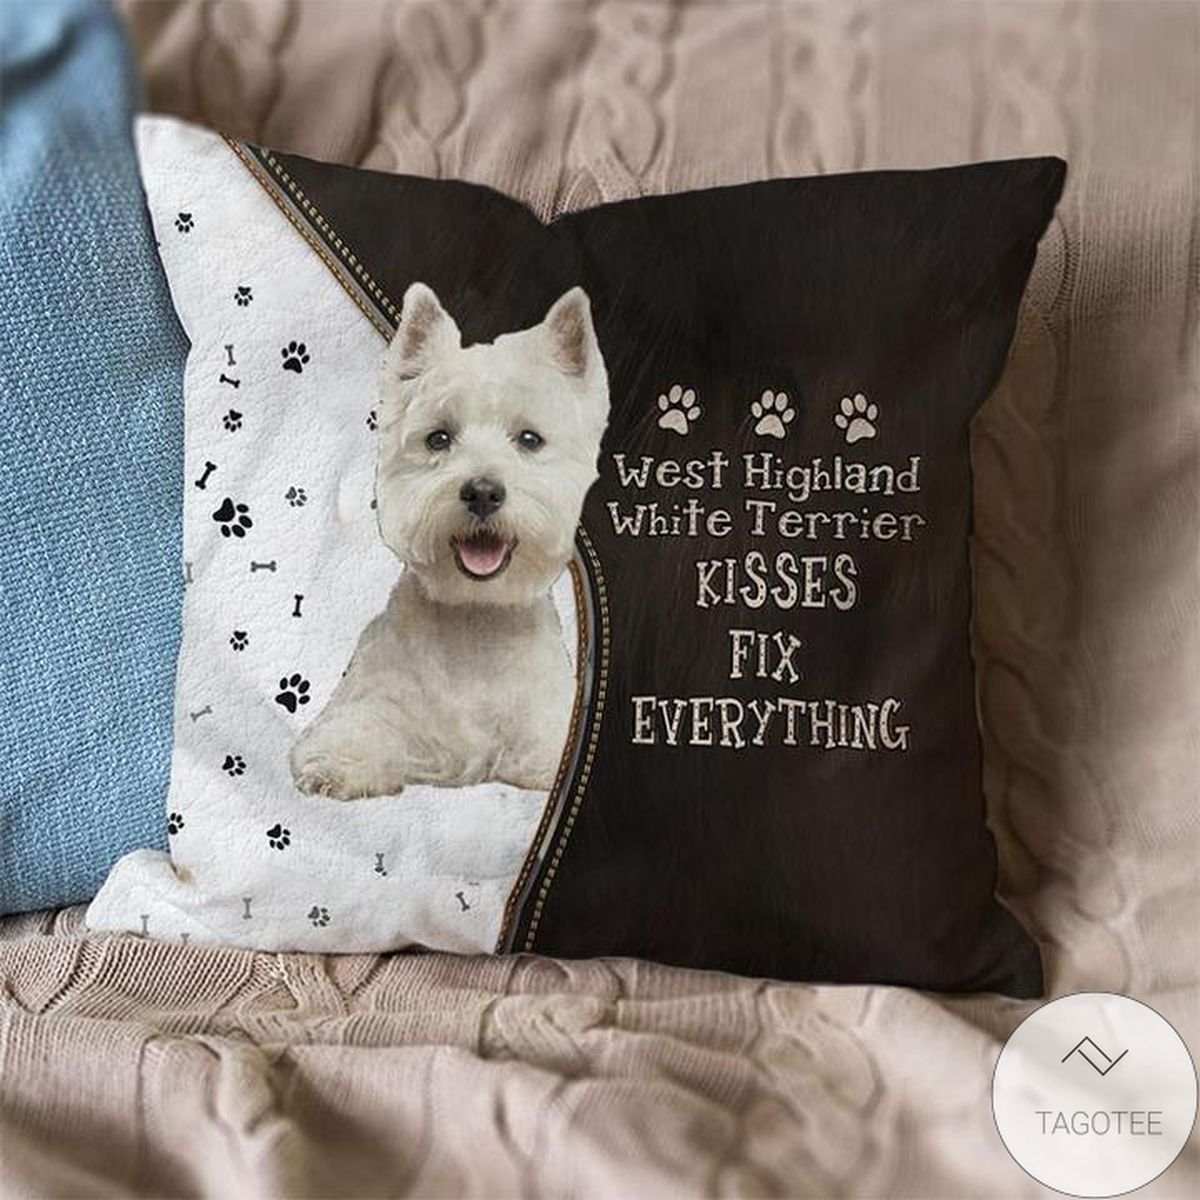 West Highland White Terrier Kisses Fix Everything Pillowcase